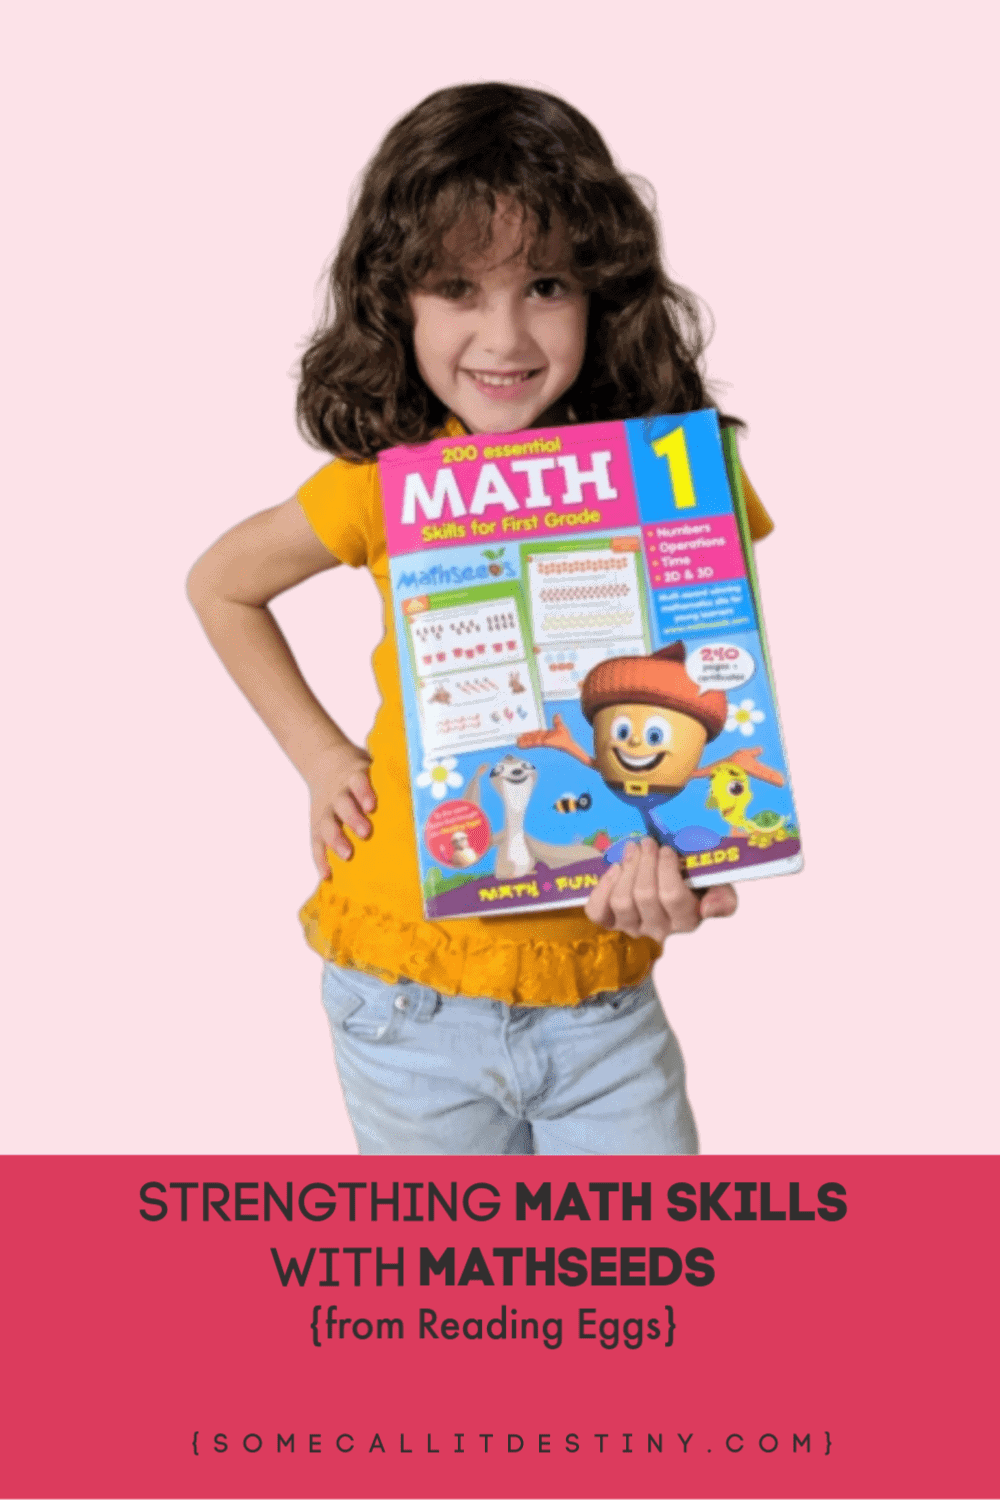 Strengthen math skills with Mathseeds from Reading Eggs